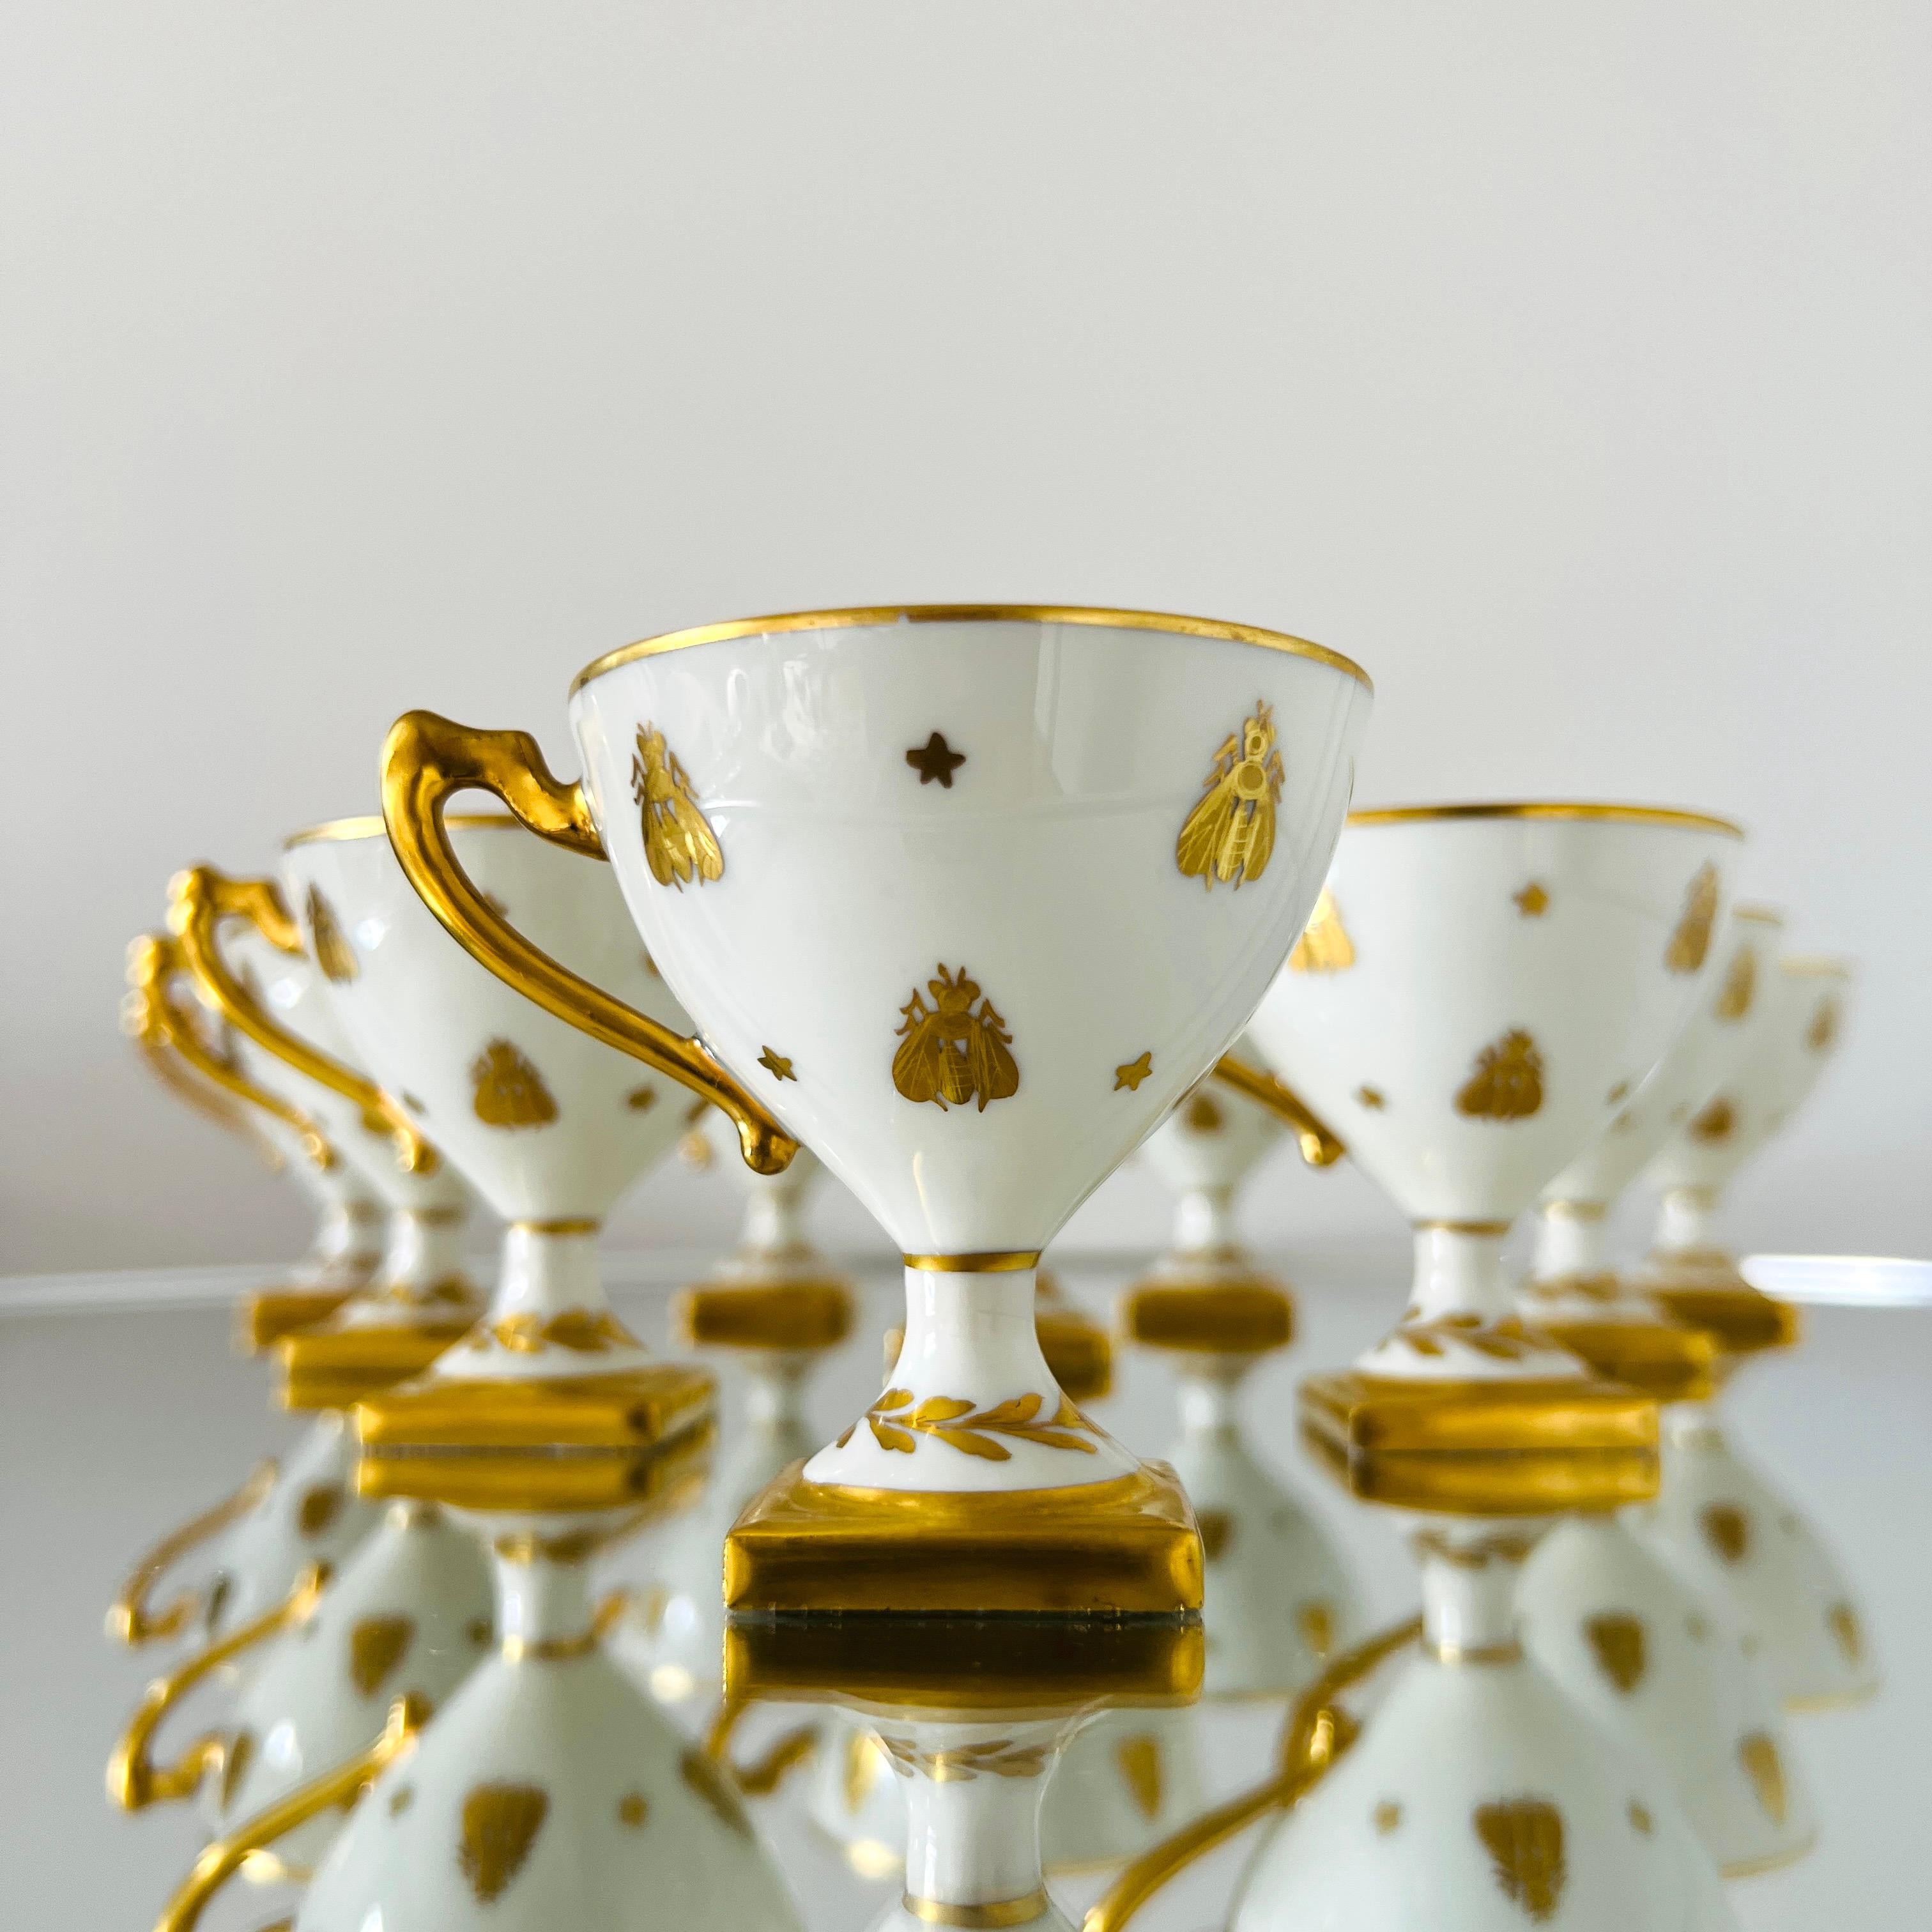 Mid-20th Century Le Tallec Golden Bees Porcelain Demitasse Cups and Saucers, circa 1957 Set/11-12 For Sale